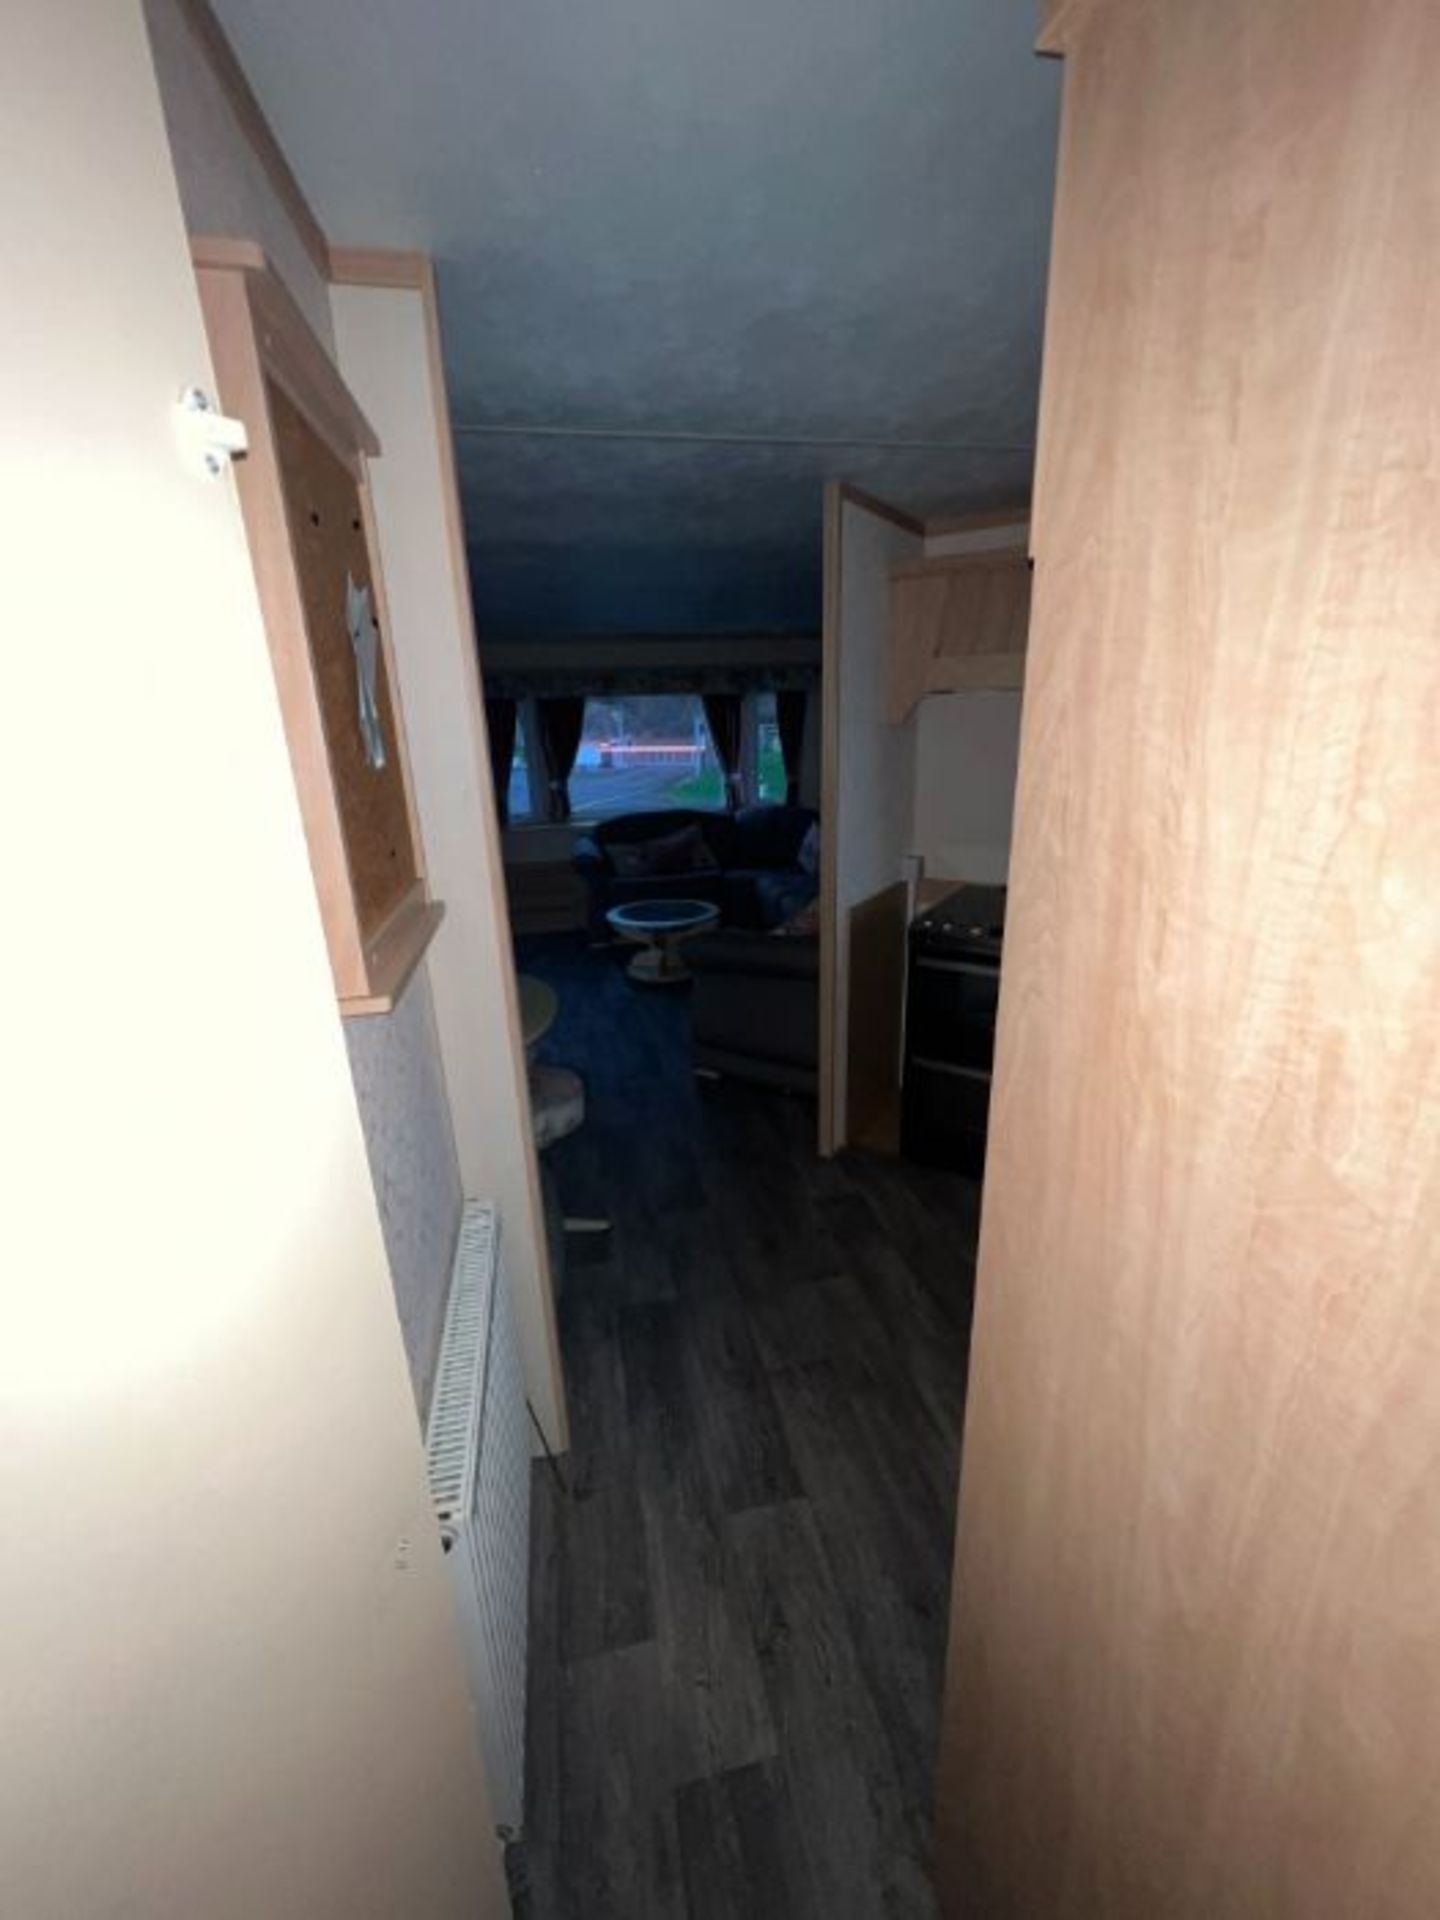 WILLERBY LYNDHURST 37FT X 12FT, 3 BEDROOM STATIC CARAVAN DOUBLE GLAZED & CENTRAL HEATING - LOCATED - Image 15 of 44